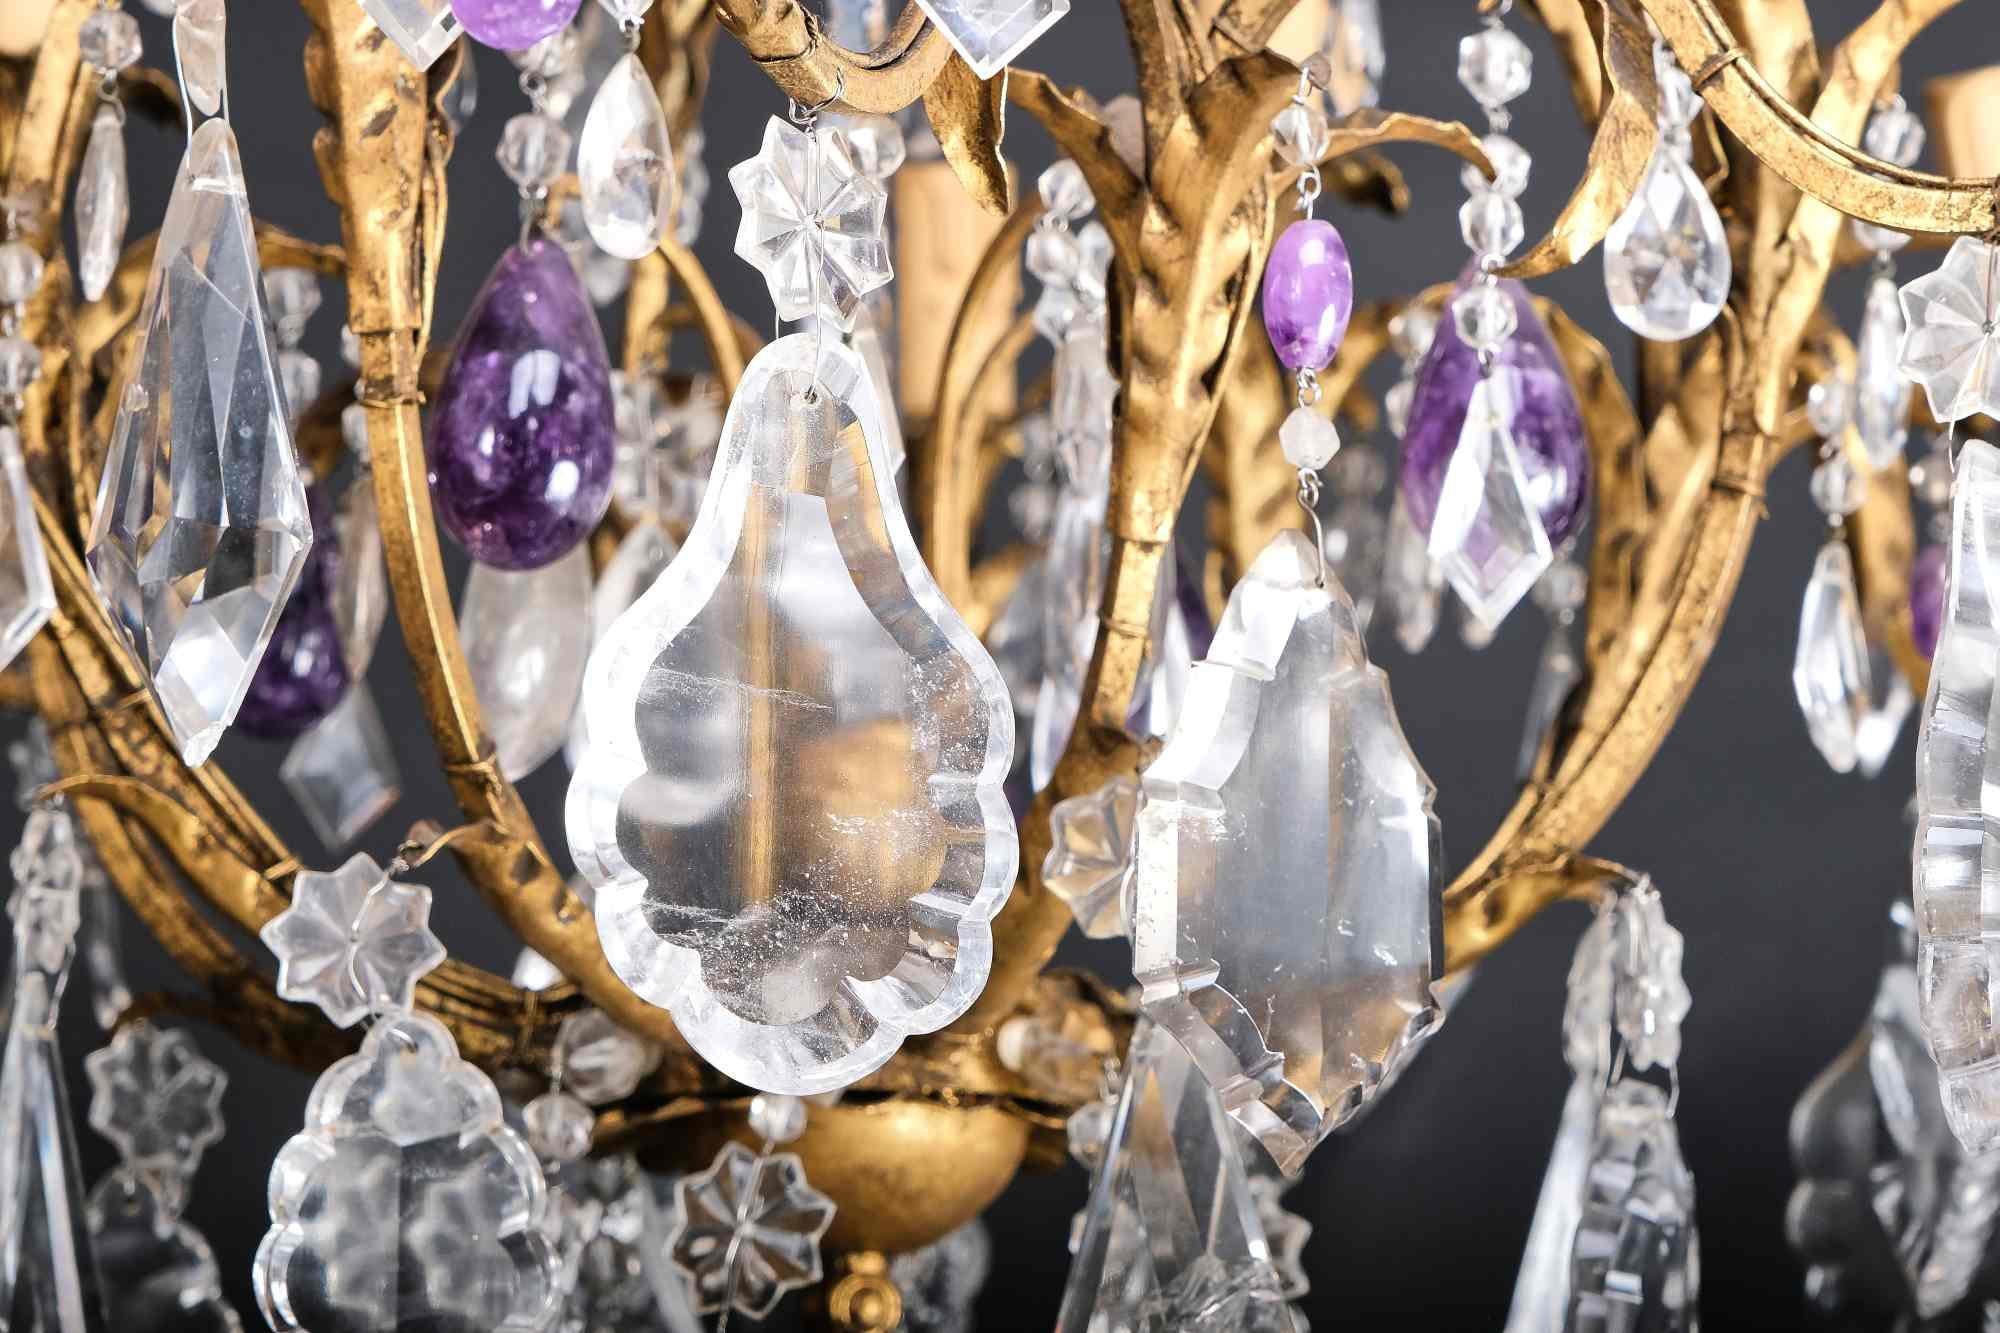 Gilt Extraordinary Italian Chandelier in Rock Crystal and Amethyst, Rome 19th Century For Sale